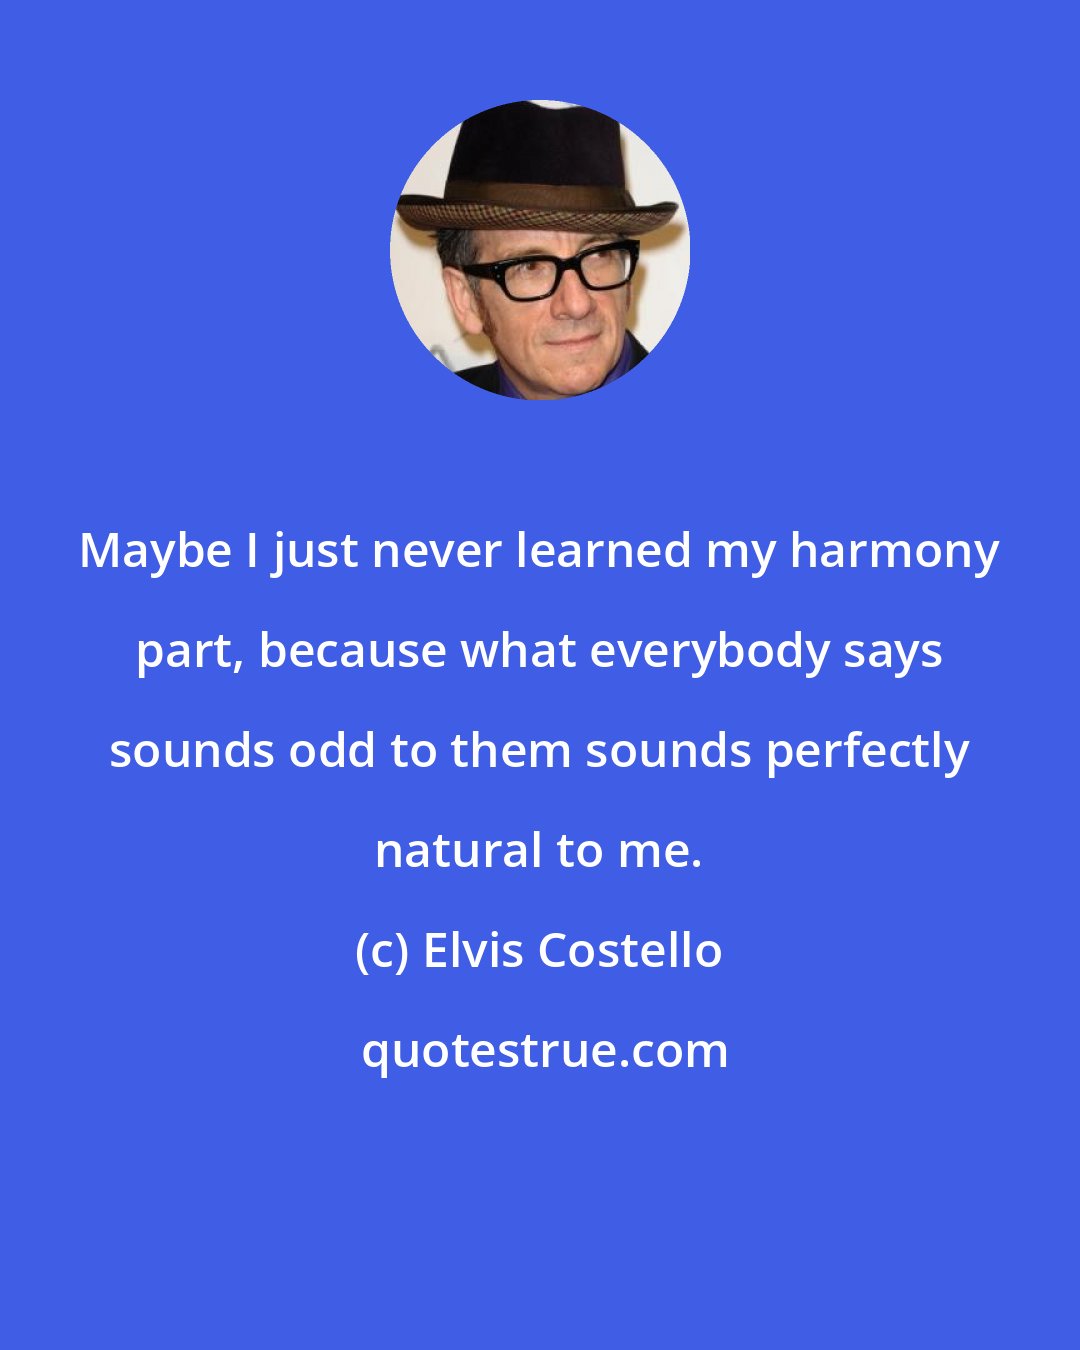 Elvis Costello: Maybe I just never learned my harmony part, because what everybody says sounds odd to them sounds perfectly natural to me.